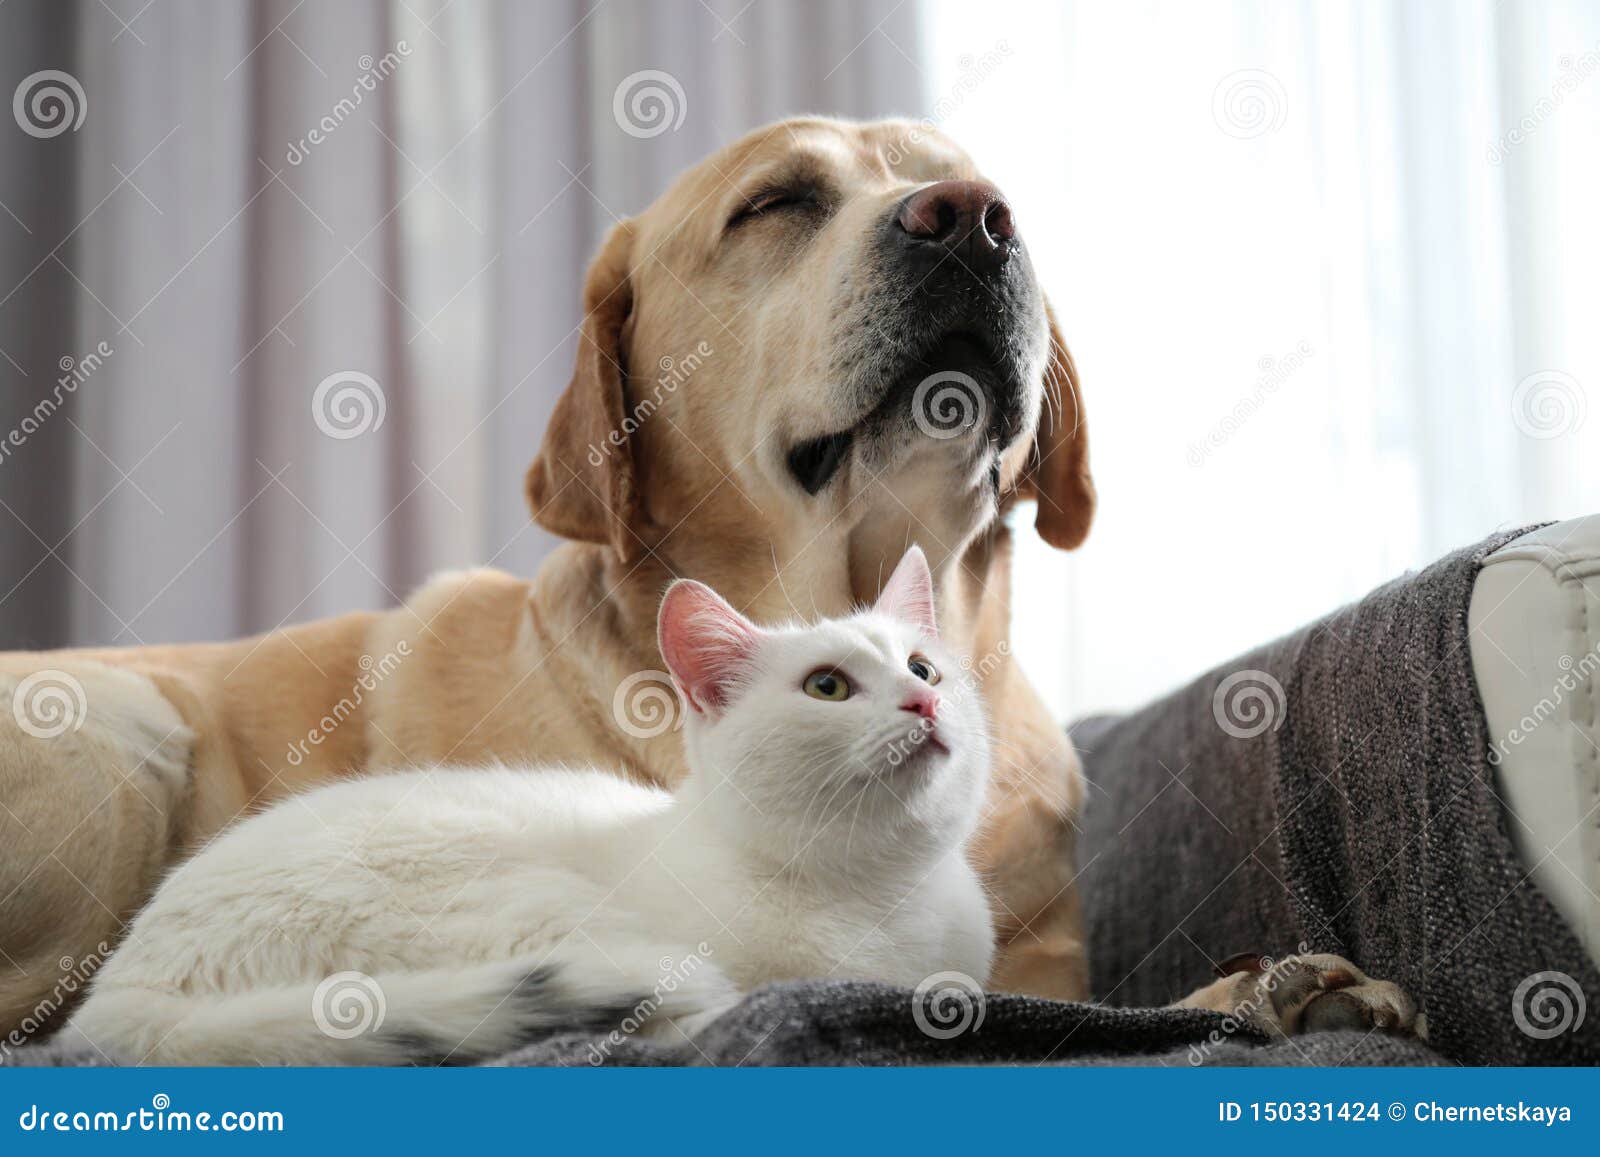 Adorable Dog And Cat Together On Sofa. Friends Forever Stock Photo